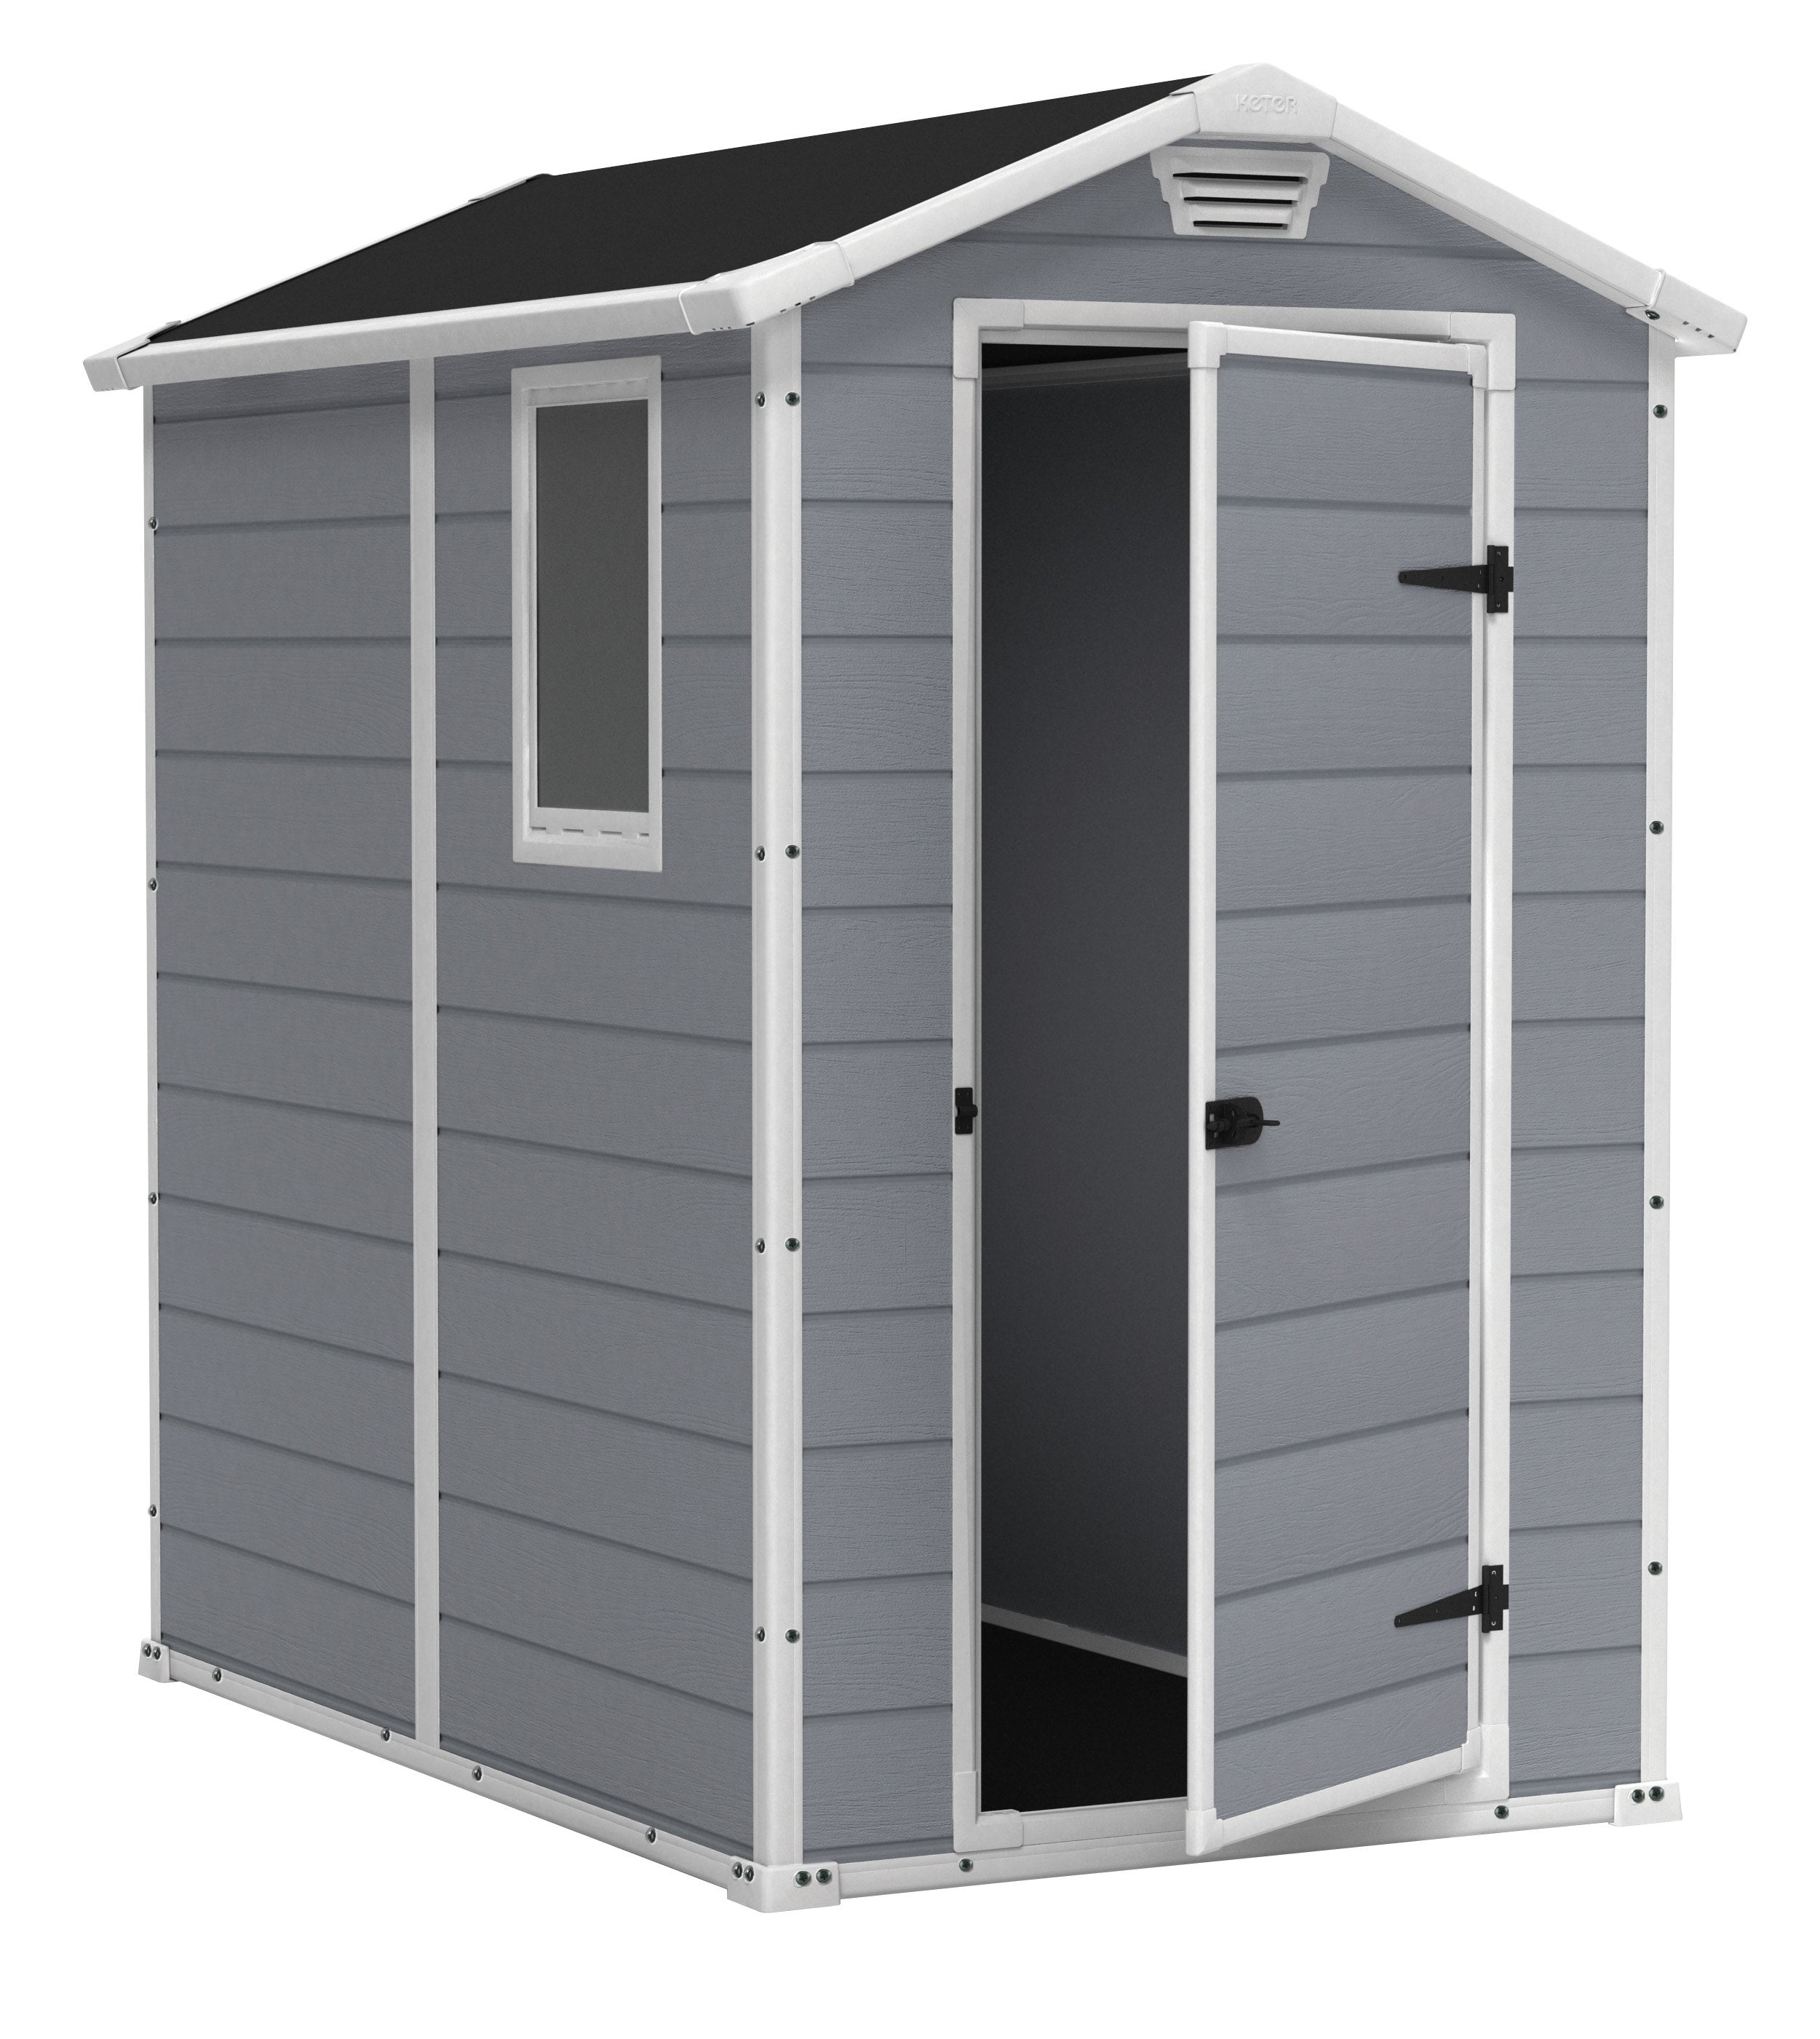 Keter Manor 4' x 6' Resin Storage Shed, All-Weather Plastic Outdoor 